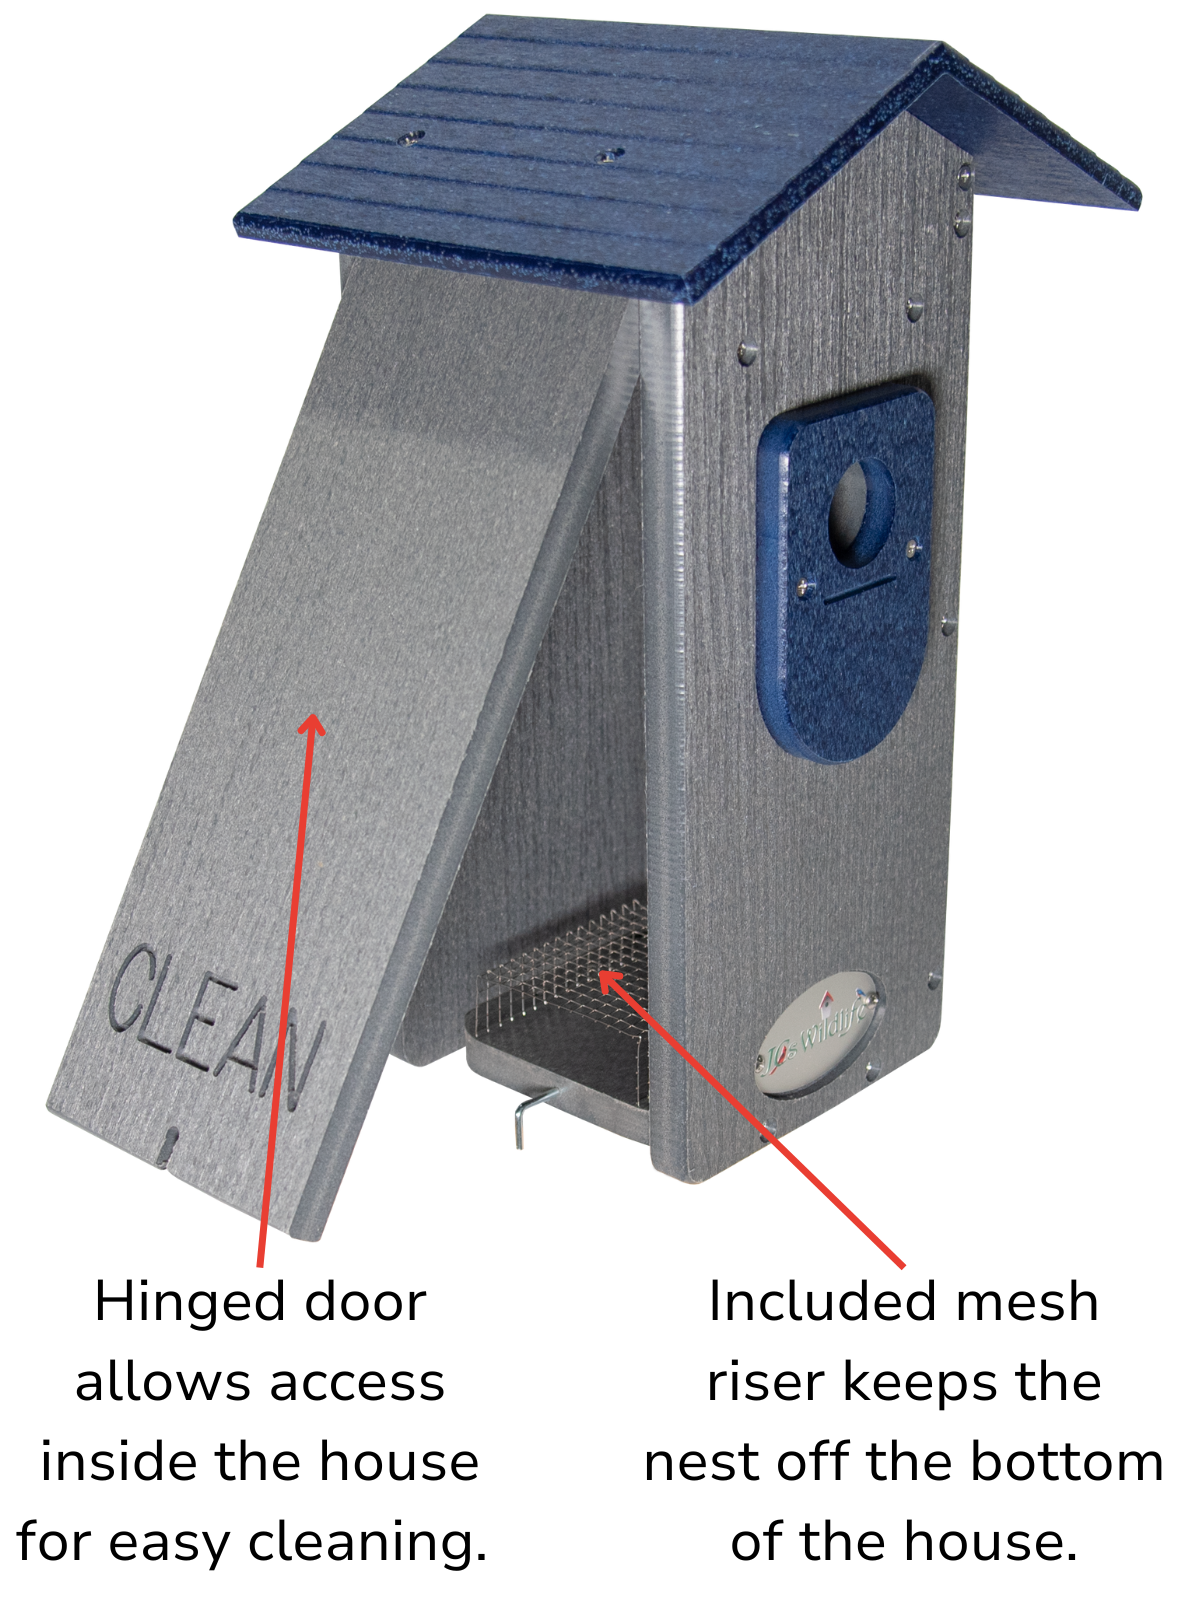 This photo shows the side of the house with an opened door labeled "Clean" with the text that reads, "Hinged door allows access inside the house for easy cleaning." Photo shows an arrow pointing to a mesh riser inside the bottom of the house that reads, "Included mesh riser keeps the nest off the bottom of the house."